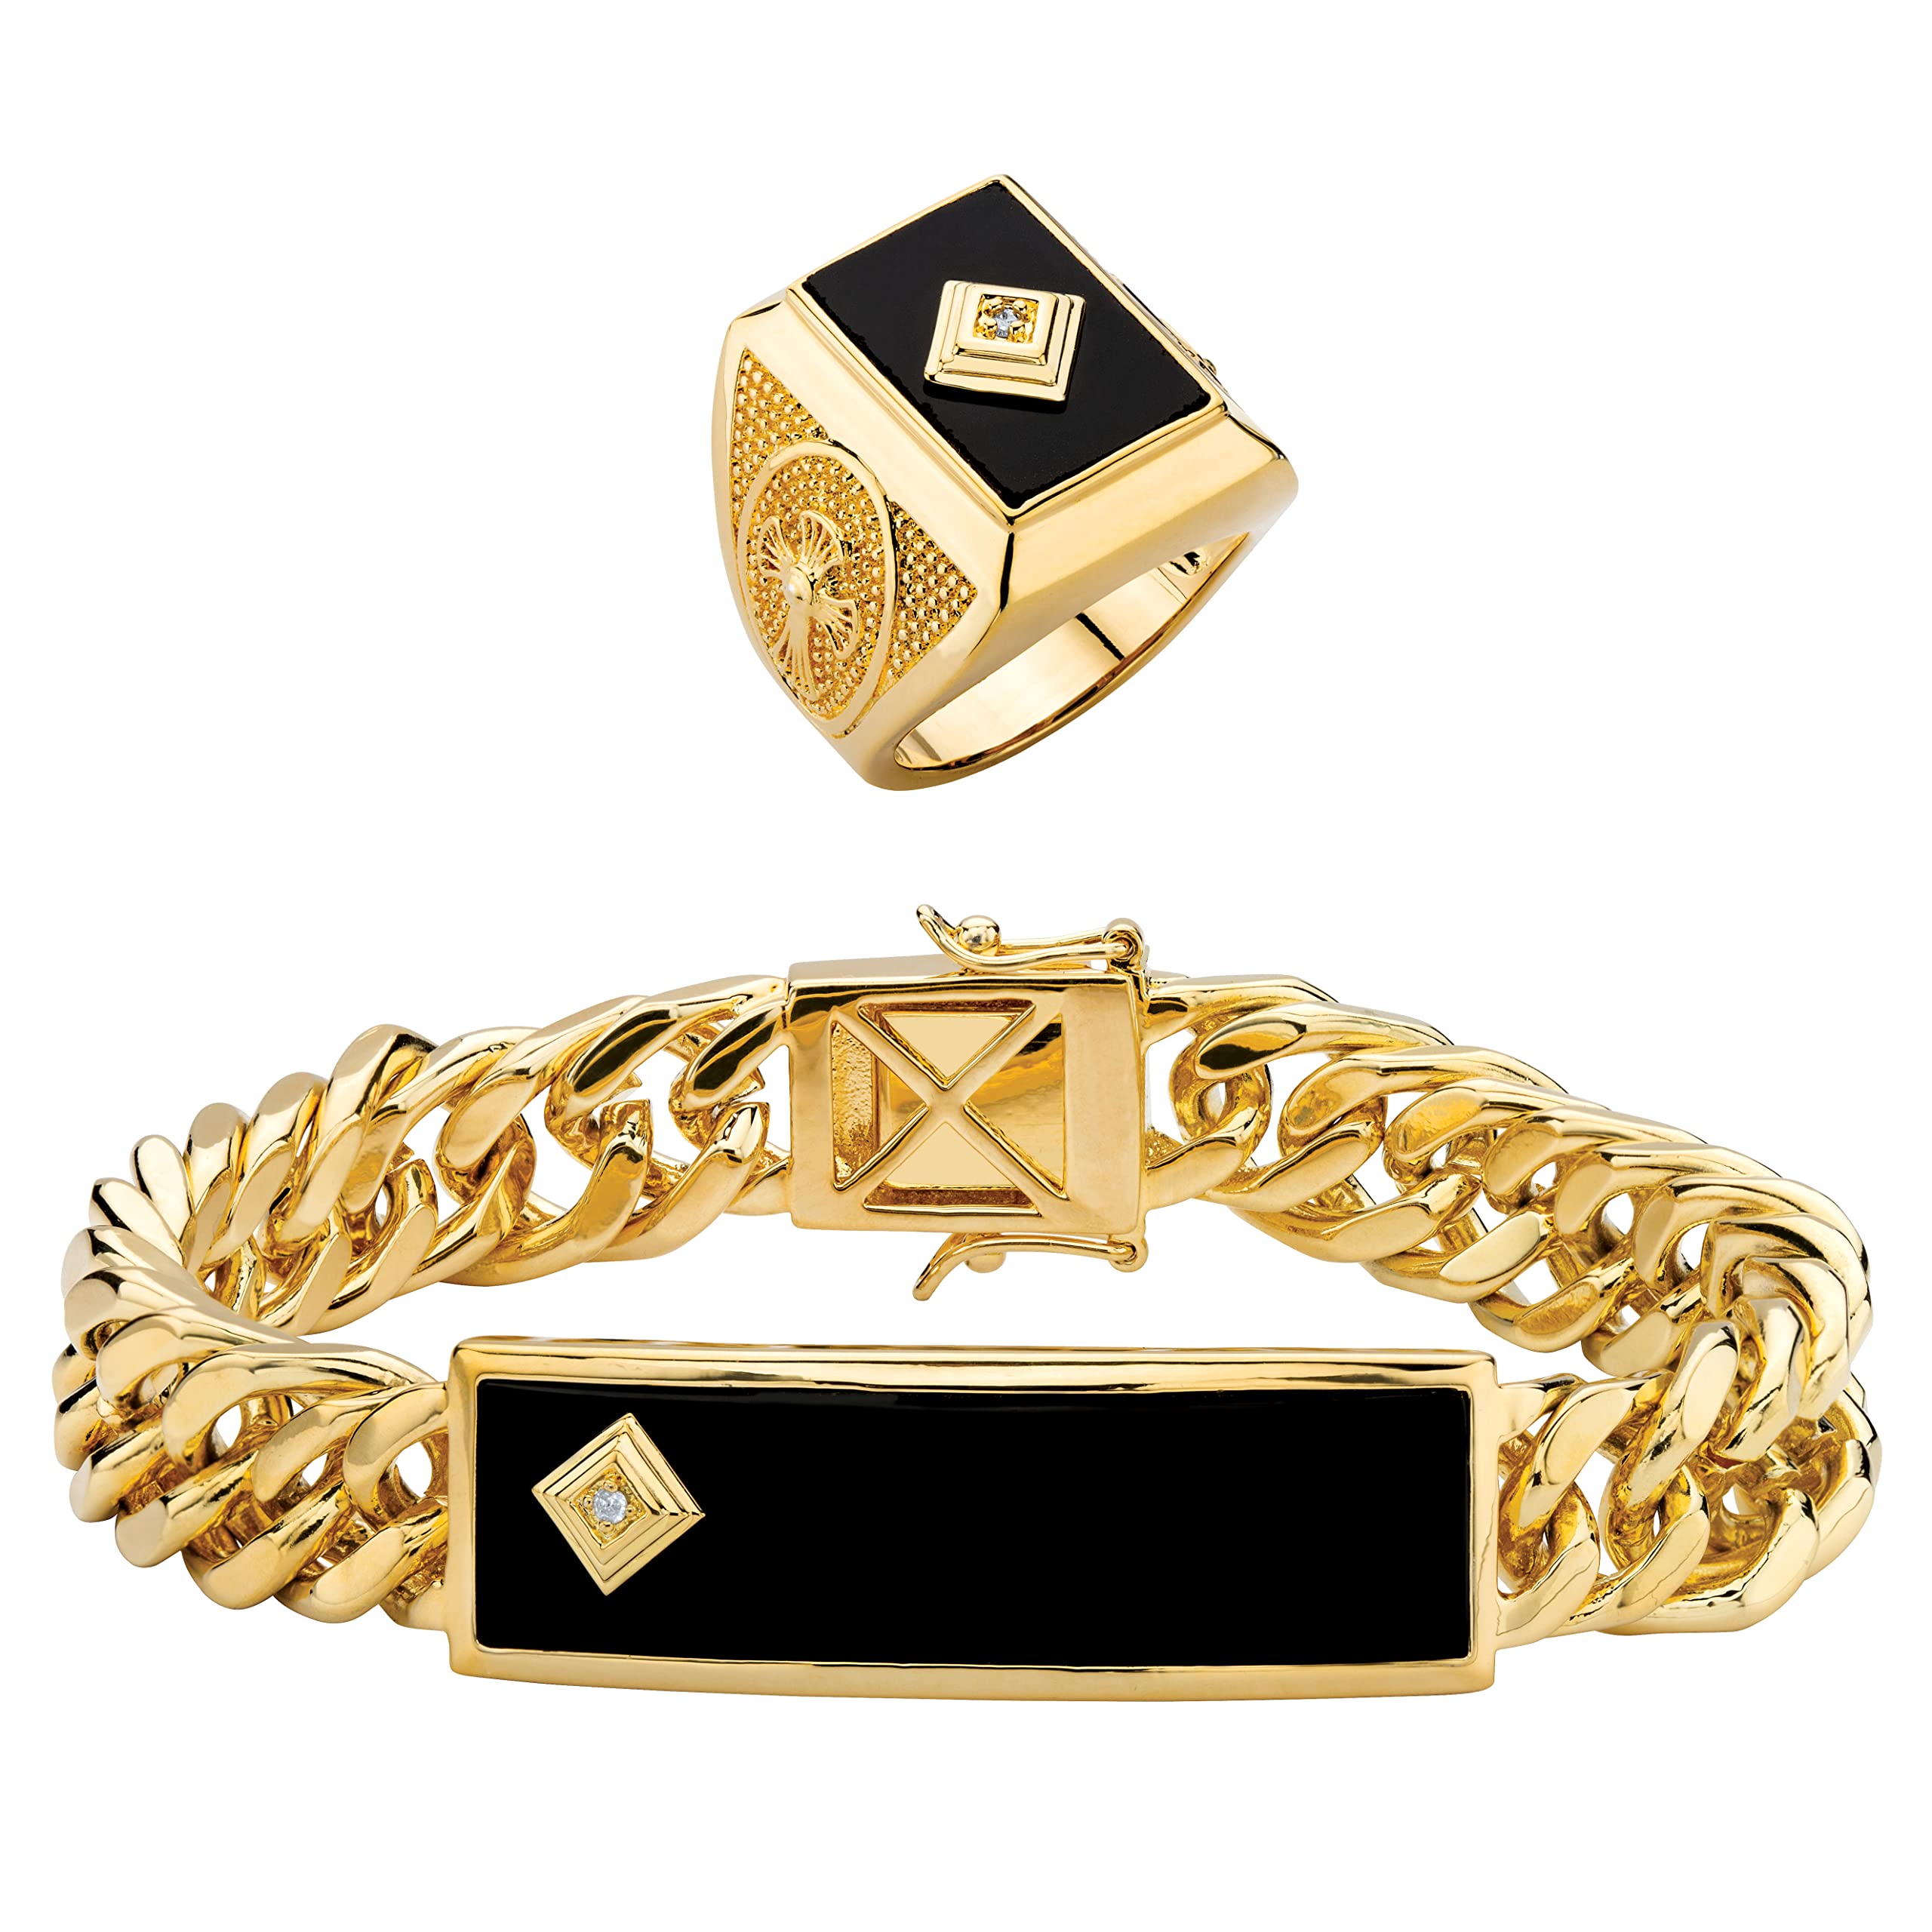 Men's Genuine Black Onyx and Diamond Accent Gold-Plated Ring and Bracelet Set 8